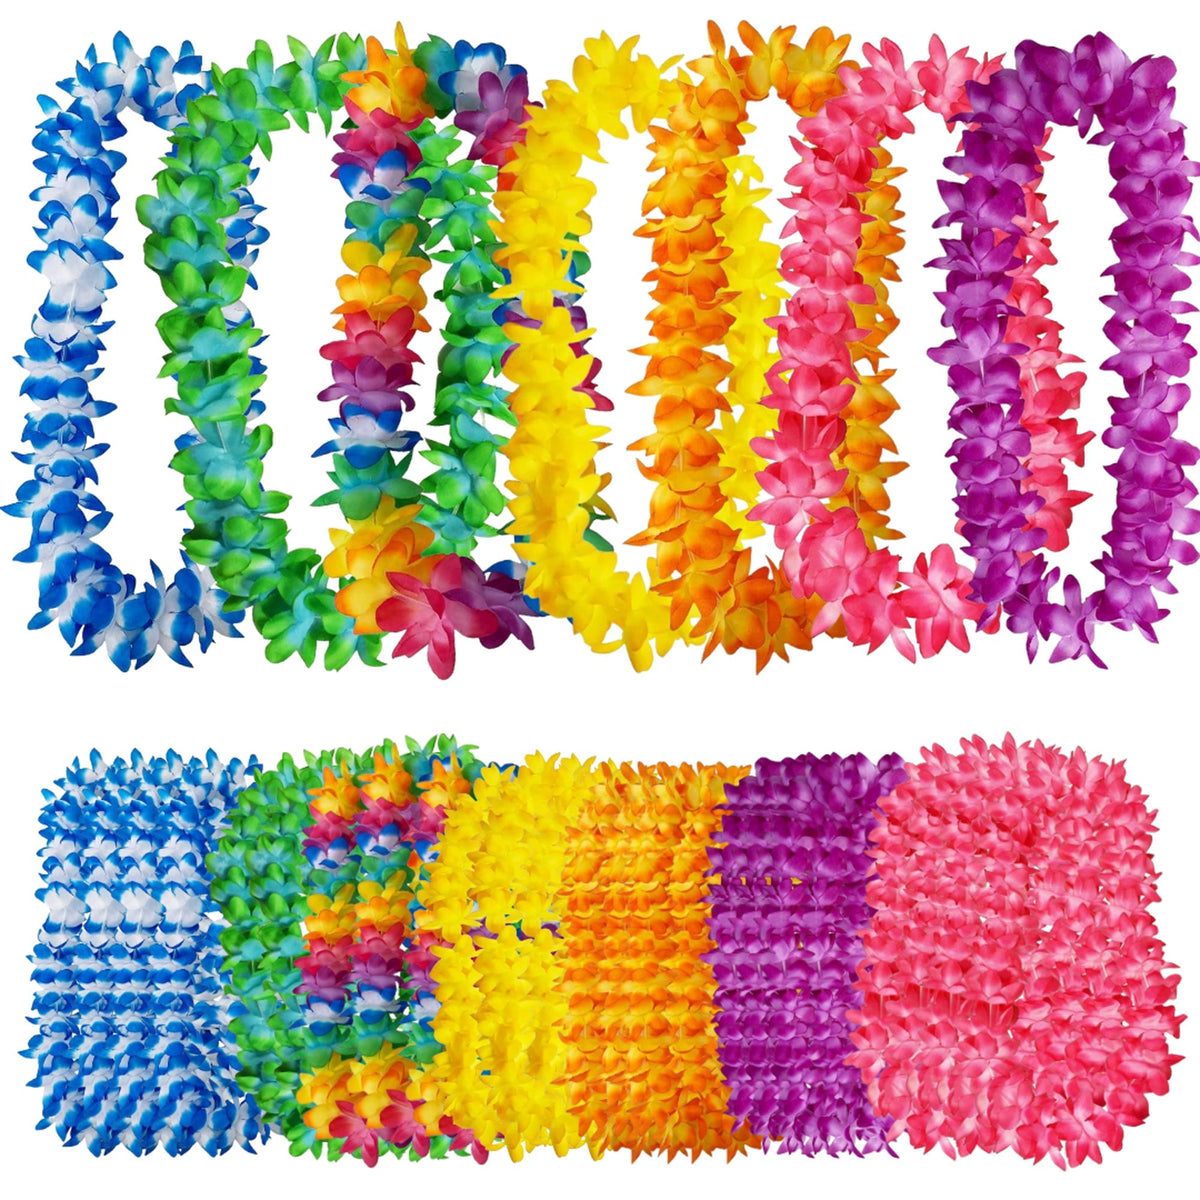 LIANGSHAN DAJIN GIFTS & TOYS CO LTD Theme Party Maui Flower Lei Necklace Assortment, 36 Count